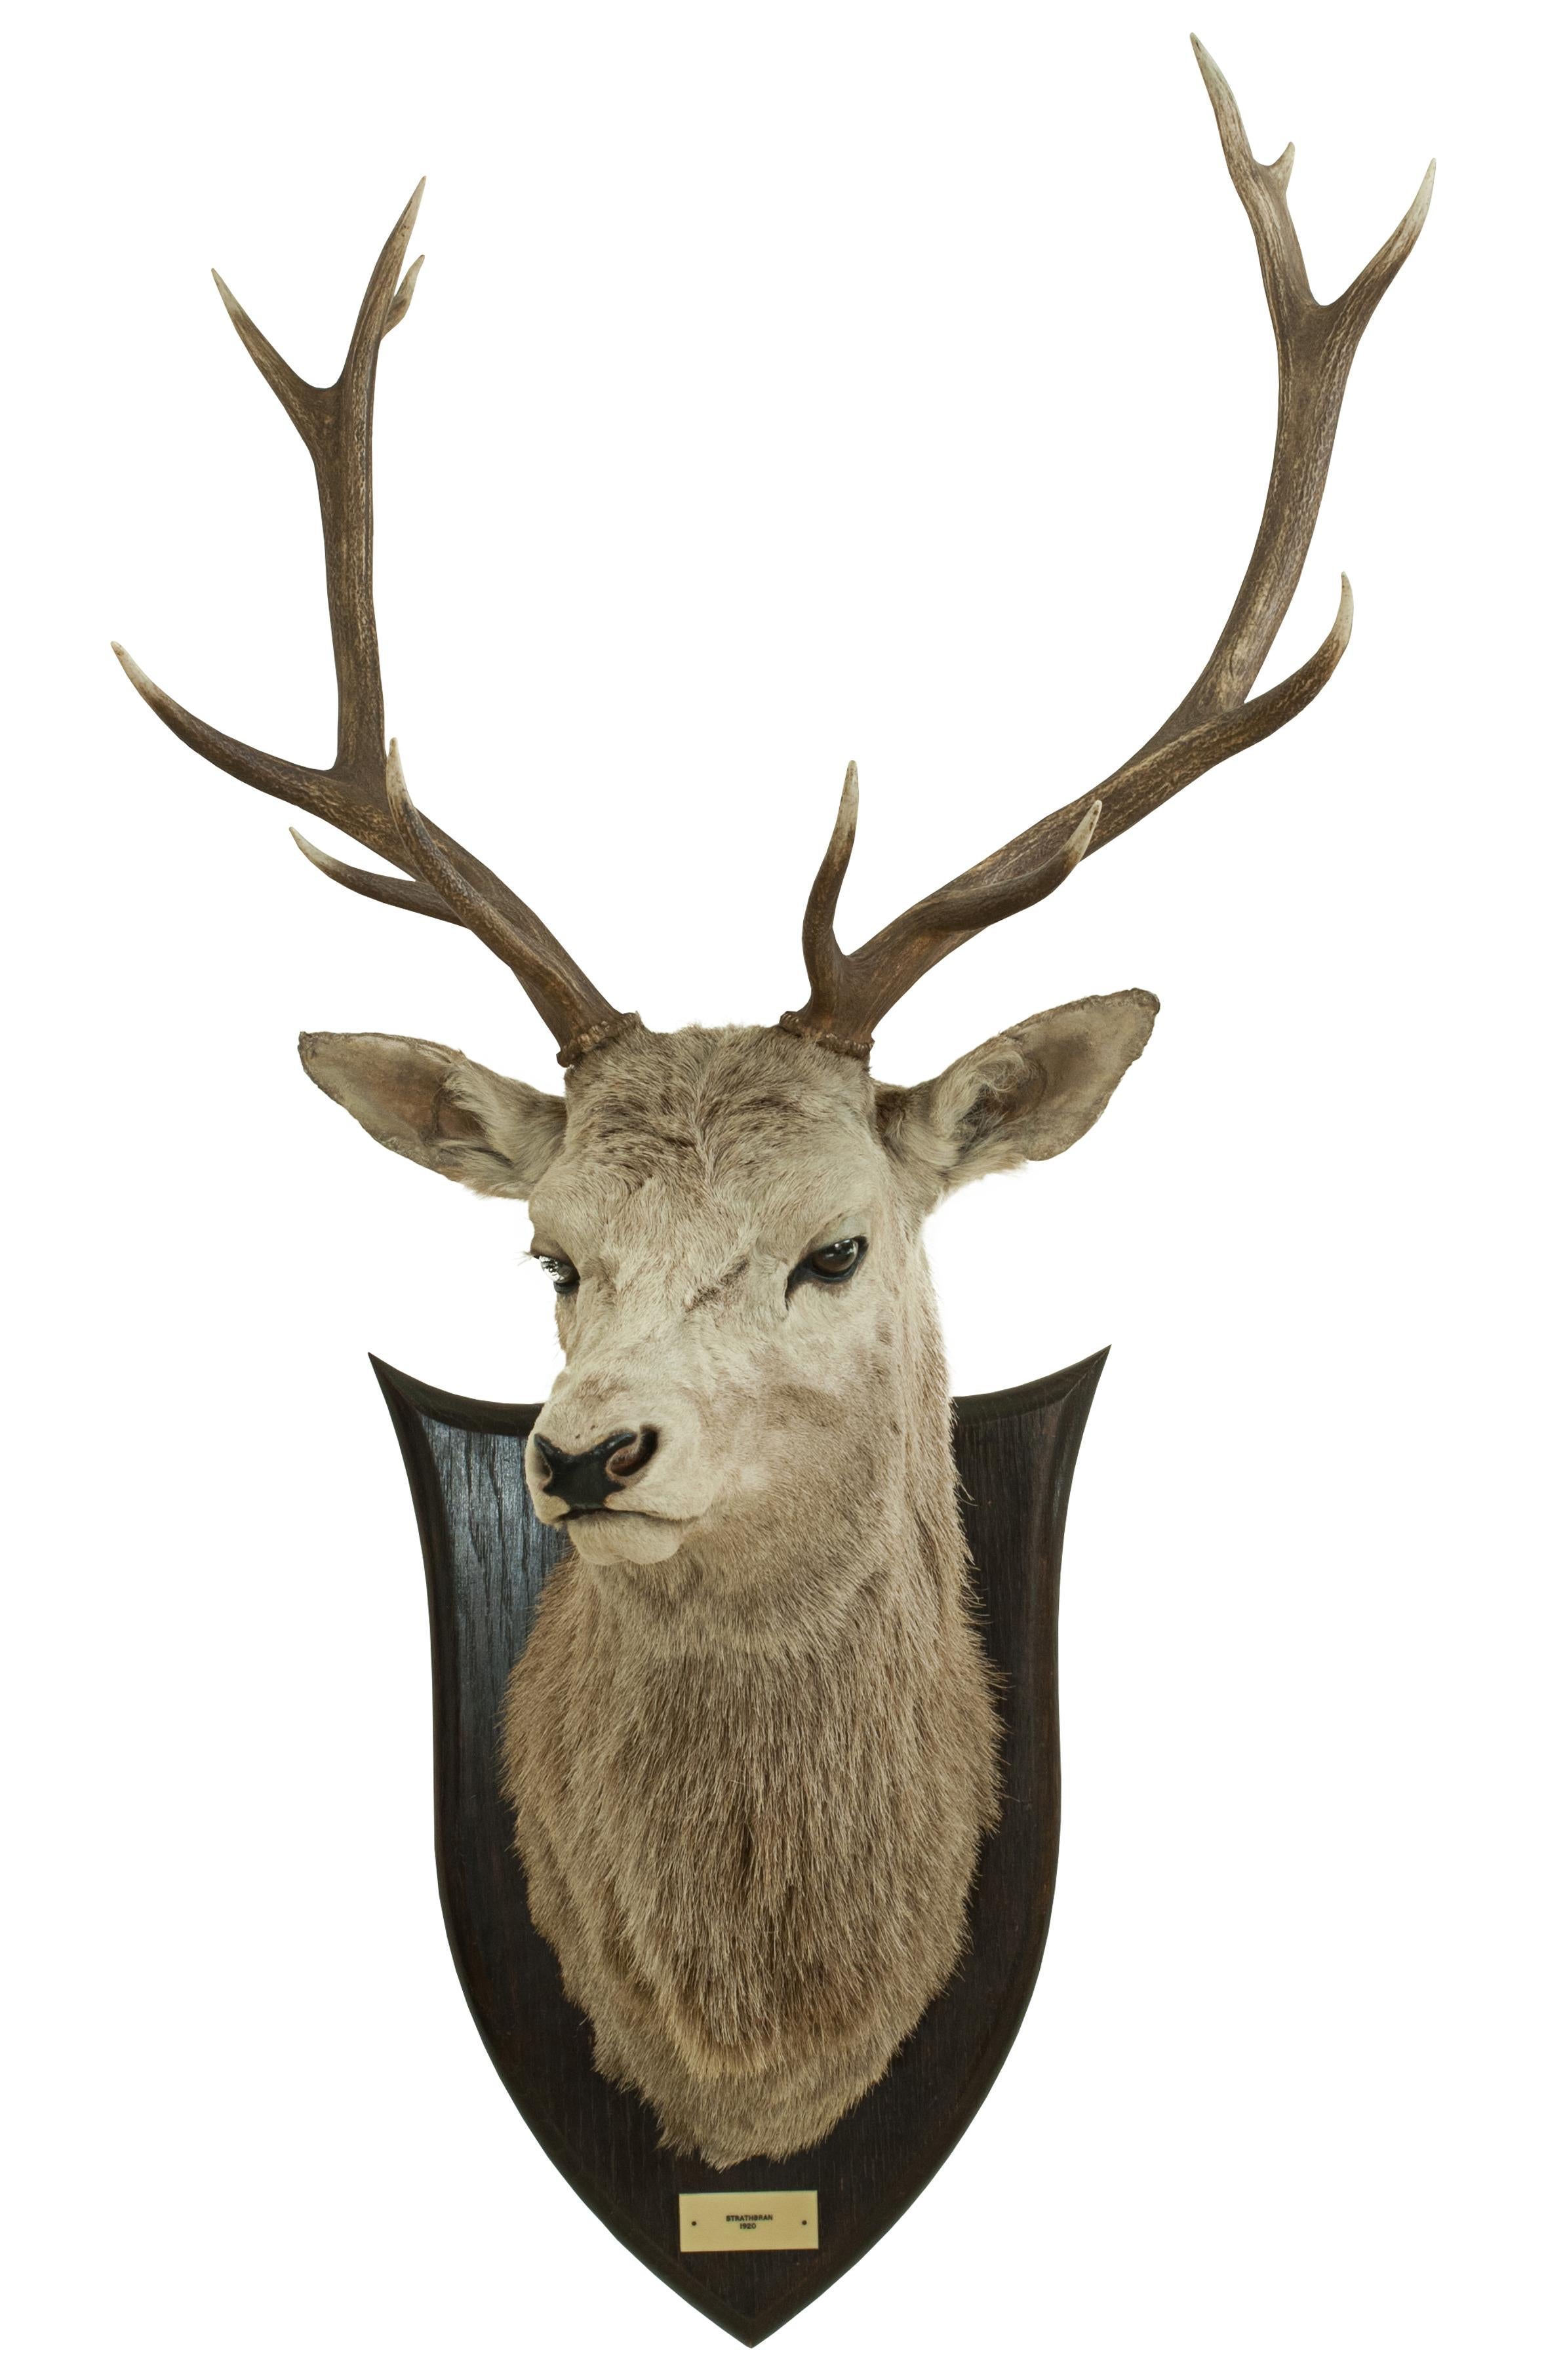 Vintage taxidermy stags head by Peter Spicer.
A good shoulder mount of a Red Deer. The head is with 12 point antler and set looking slightly to his right, our left. The taxidermy head is mounted onto a shaped polished oak shield with ivorine plaque